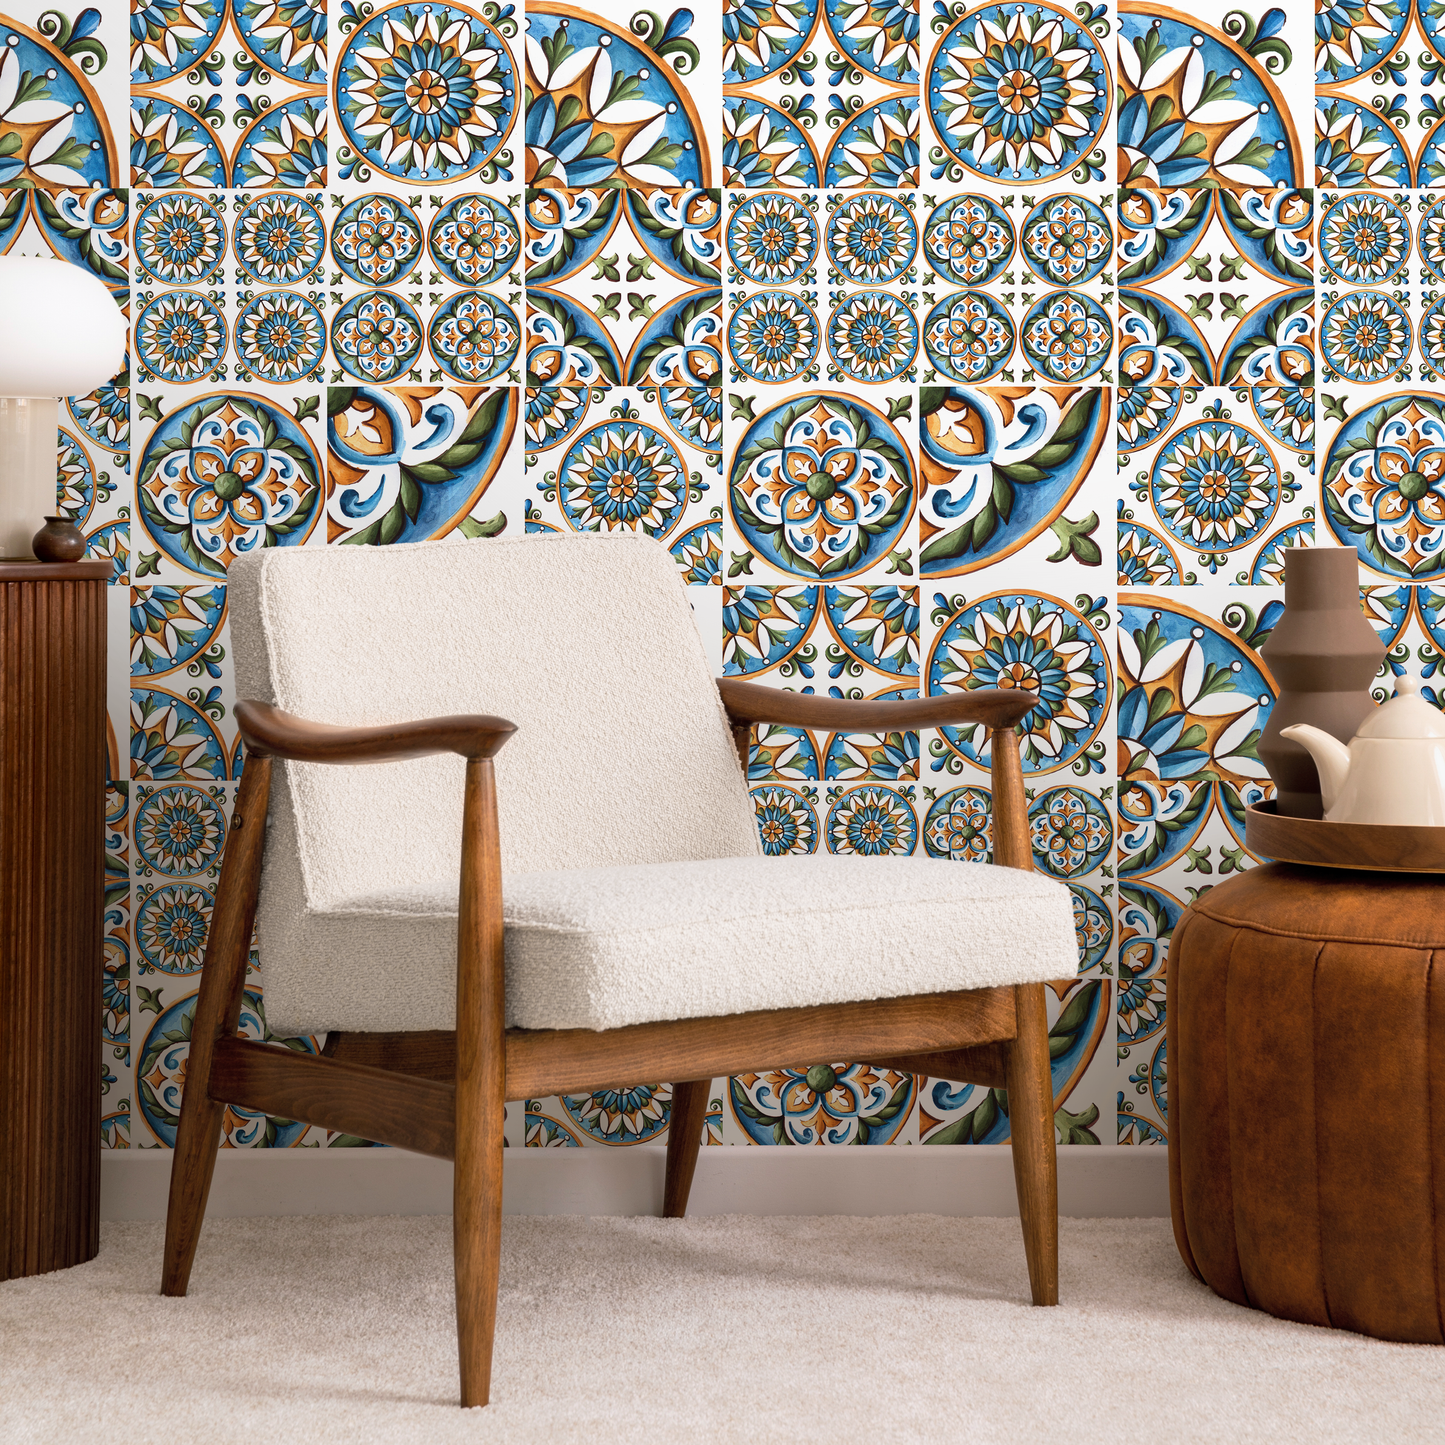 Removable Wallpaper Peel and Stick Wallpaper Wall Paper Wall Mural - Portuguese Azulejos Tile Wallpaper - A388